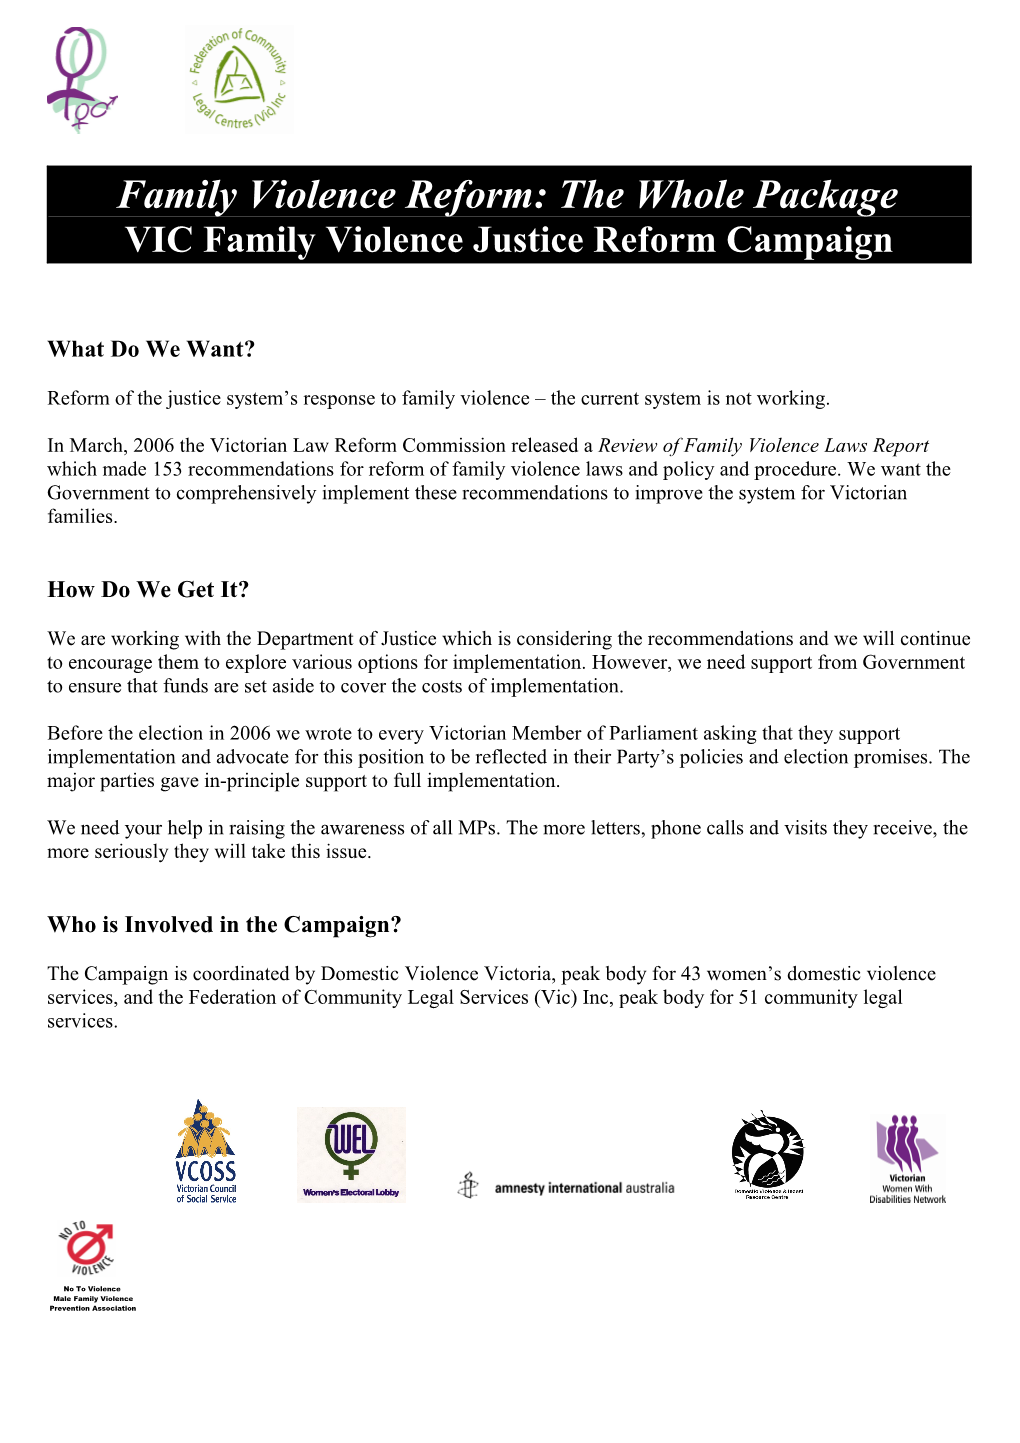 Family Violence Reform: the Whole Package